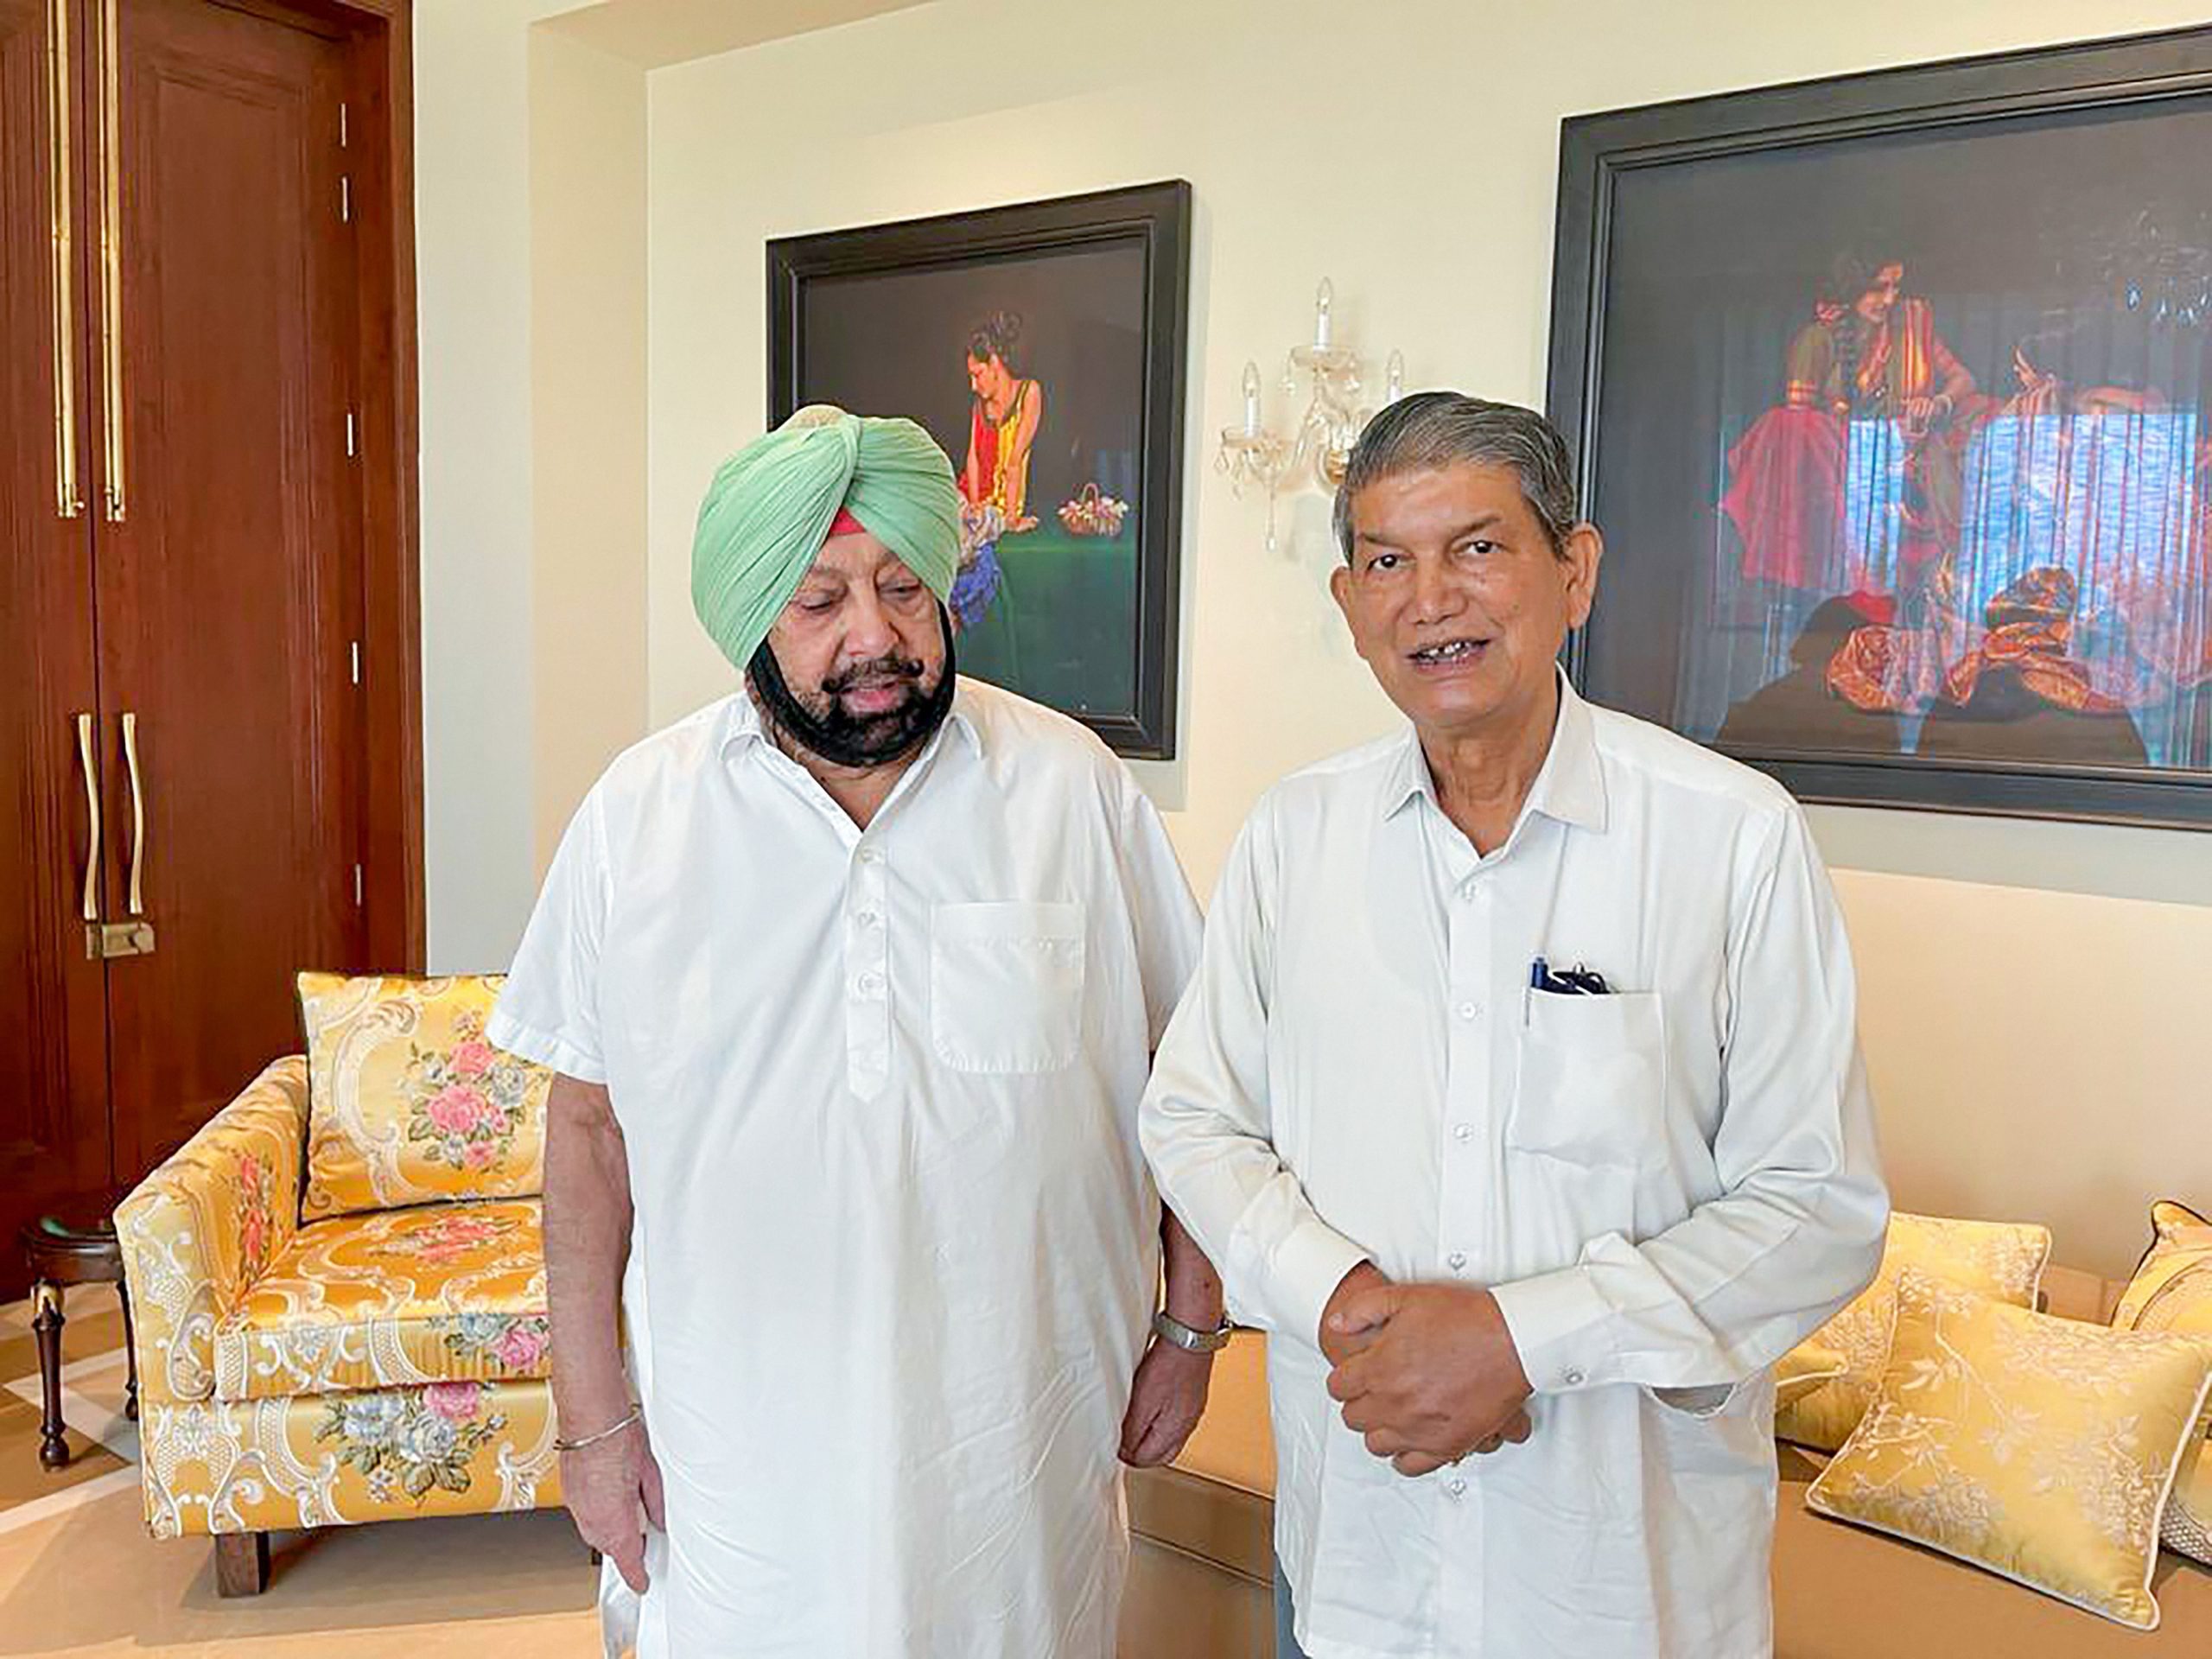 AICC chief meets Amarinder Singh to resolve commotion in Punjab Congress